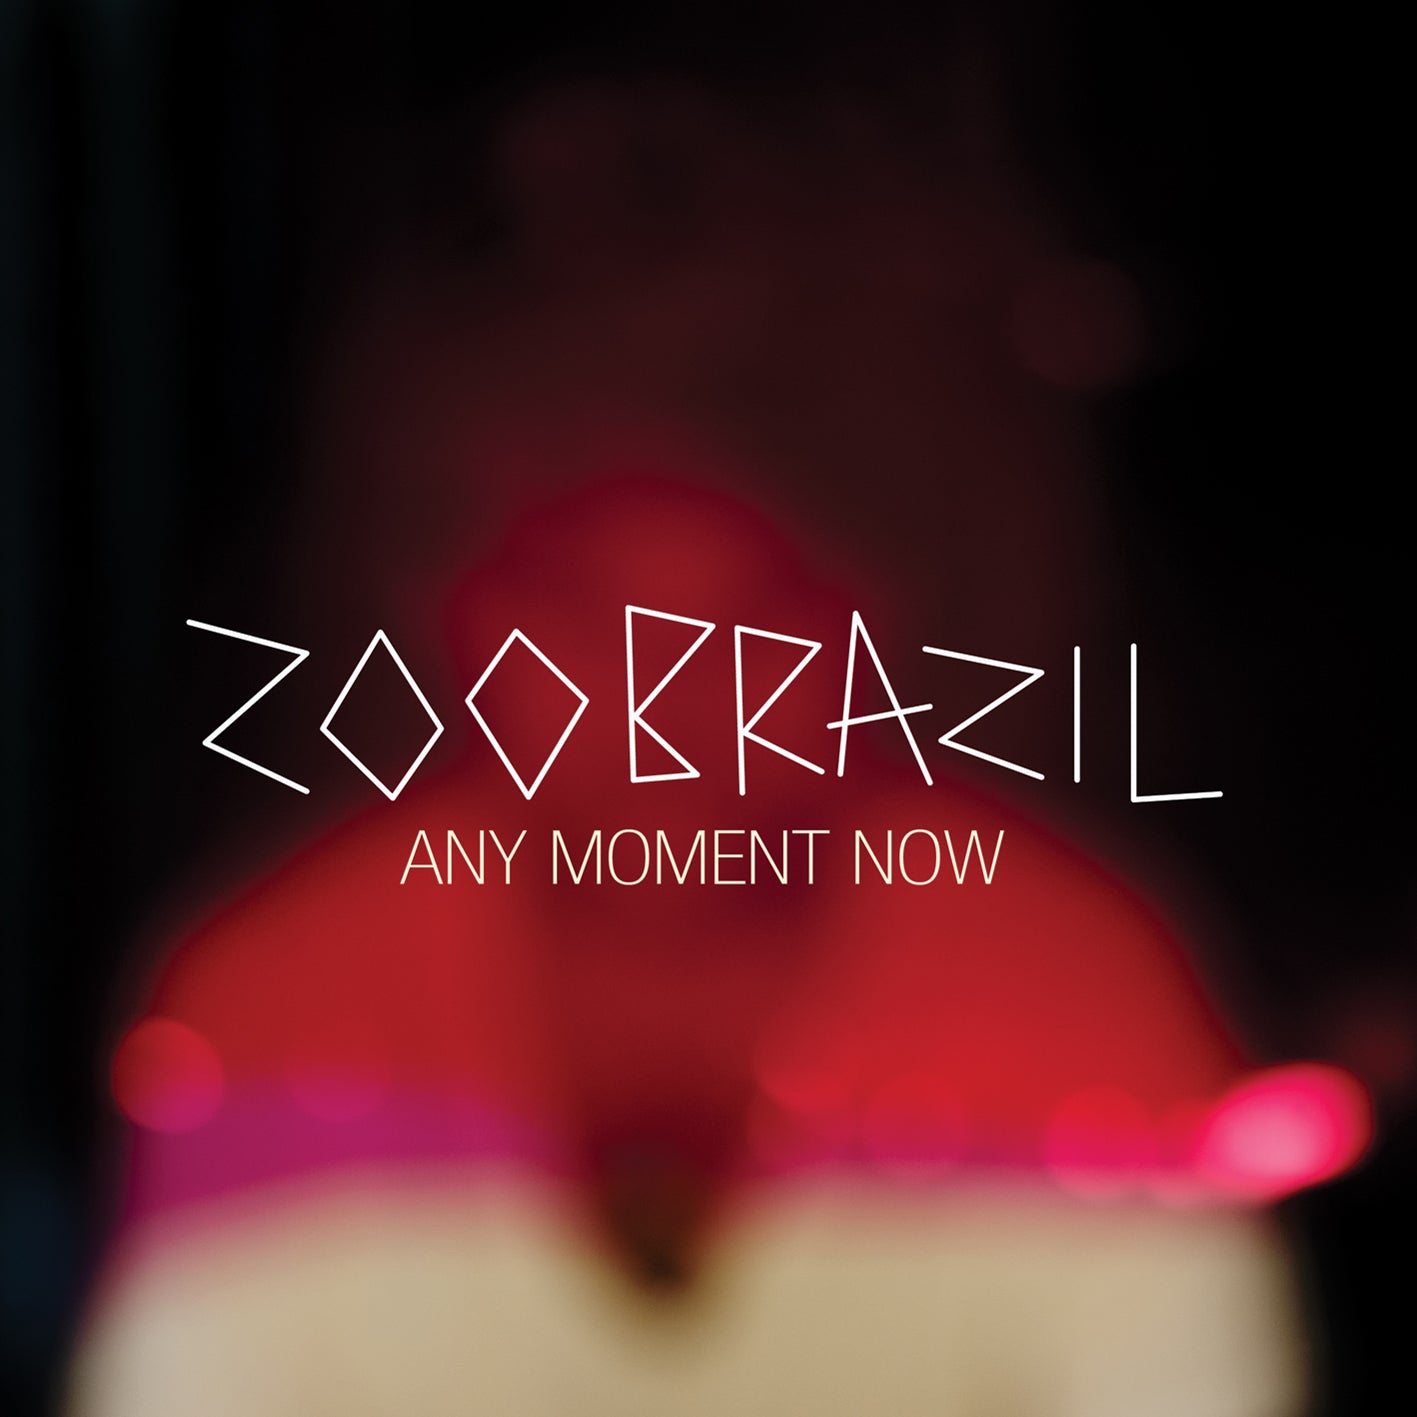 Zoo Brazil - Any Moment Now